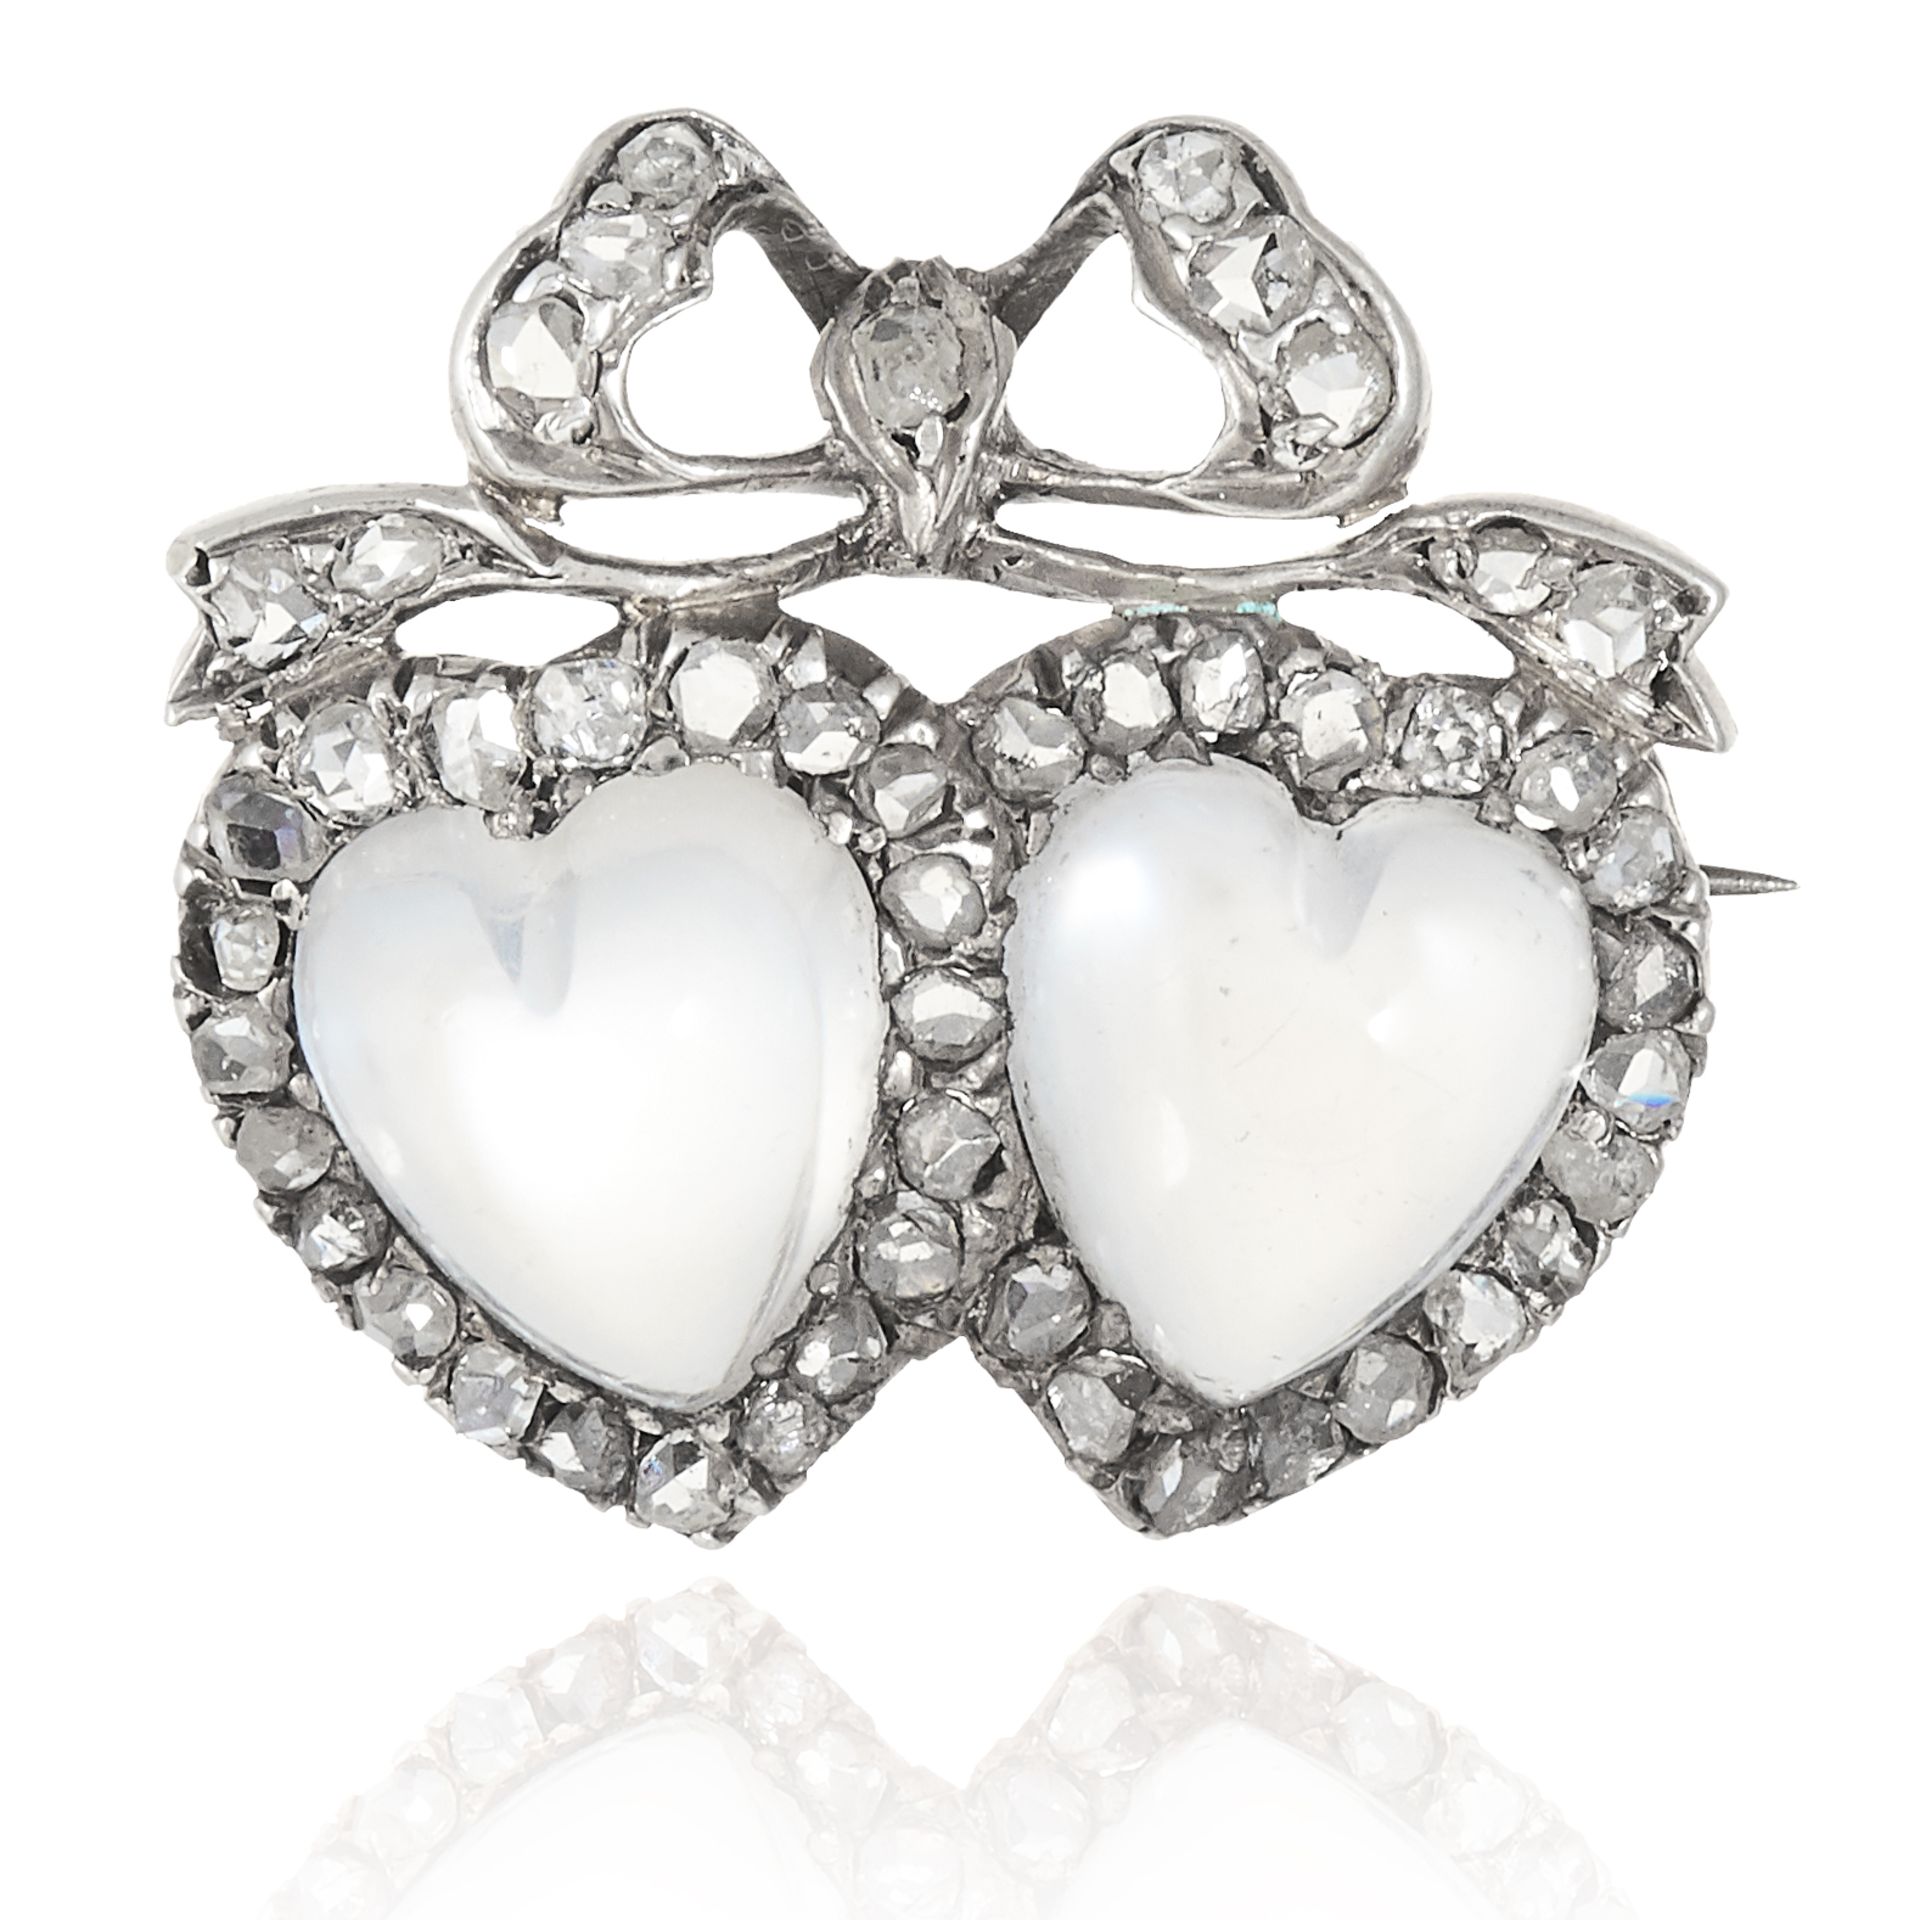 AN ANTIQUE MOONSTONE AND DIAMOND SWEETHEART BROOCH in yellow gold, set with two heart-shaped